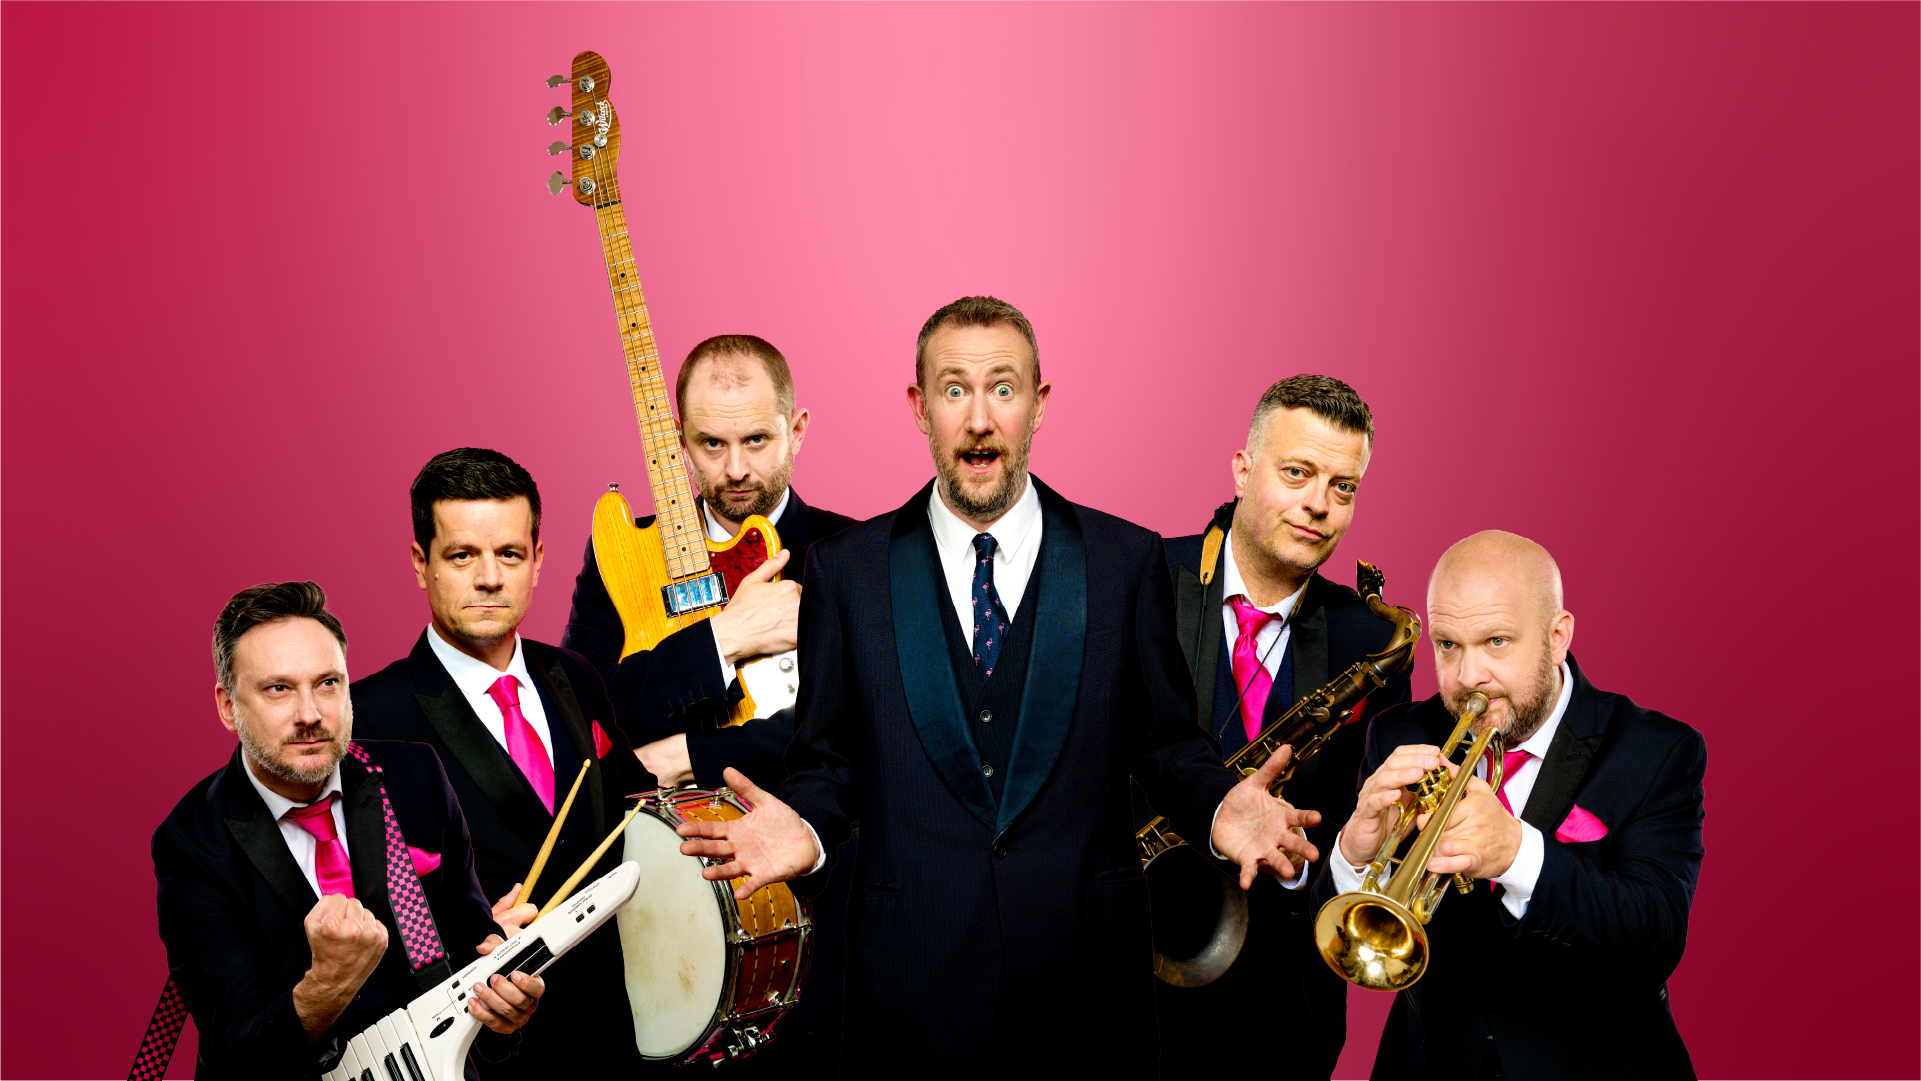 A group of six men stand in front of a pink background holding various musical instruments